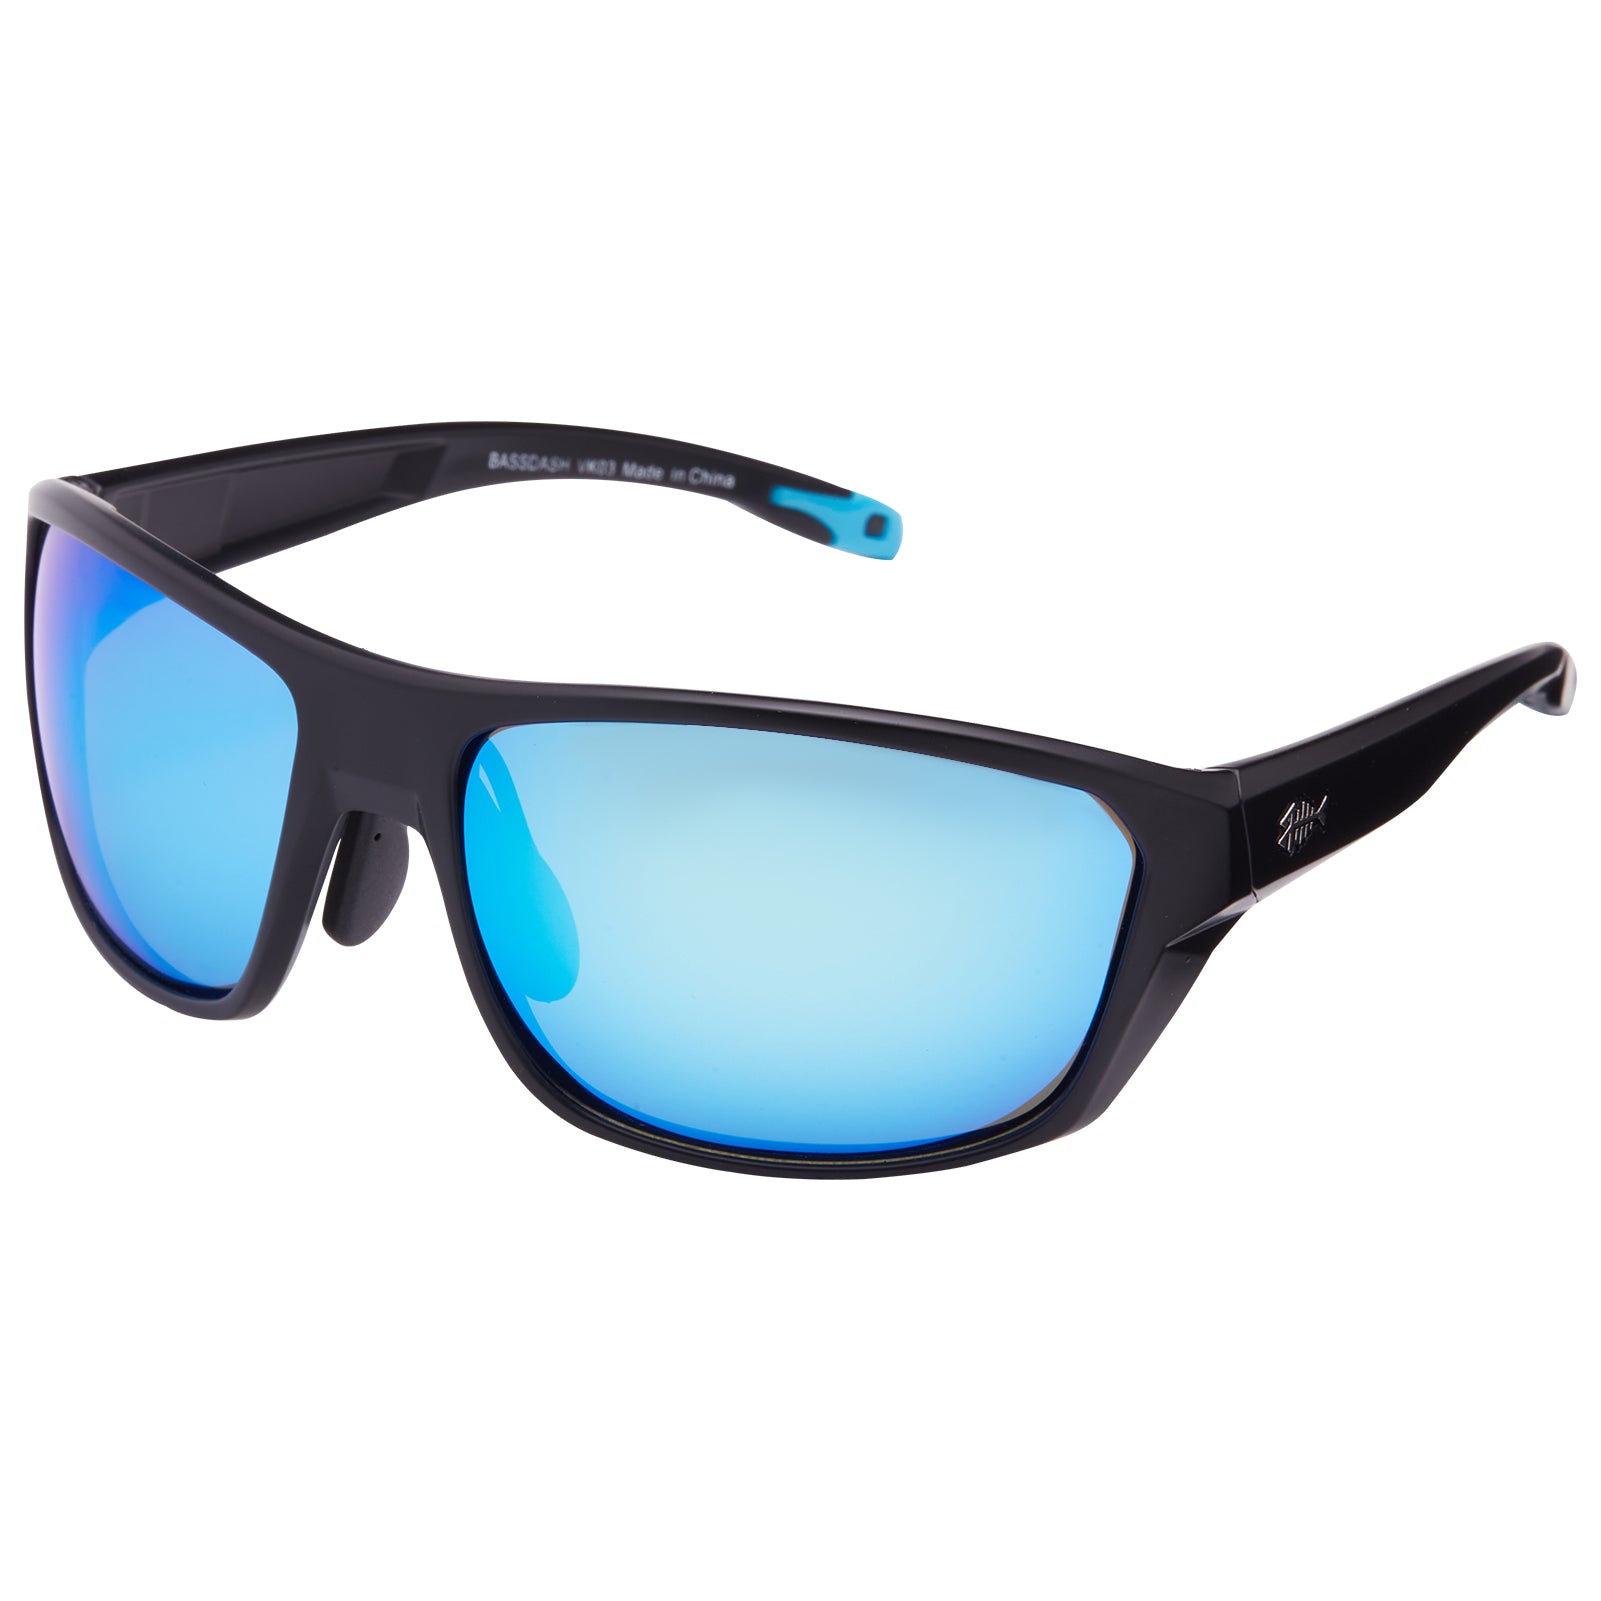 Polarized Camouflage Sunglasses for Fishing and Hunting, Blue Lens